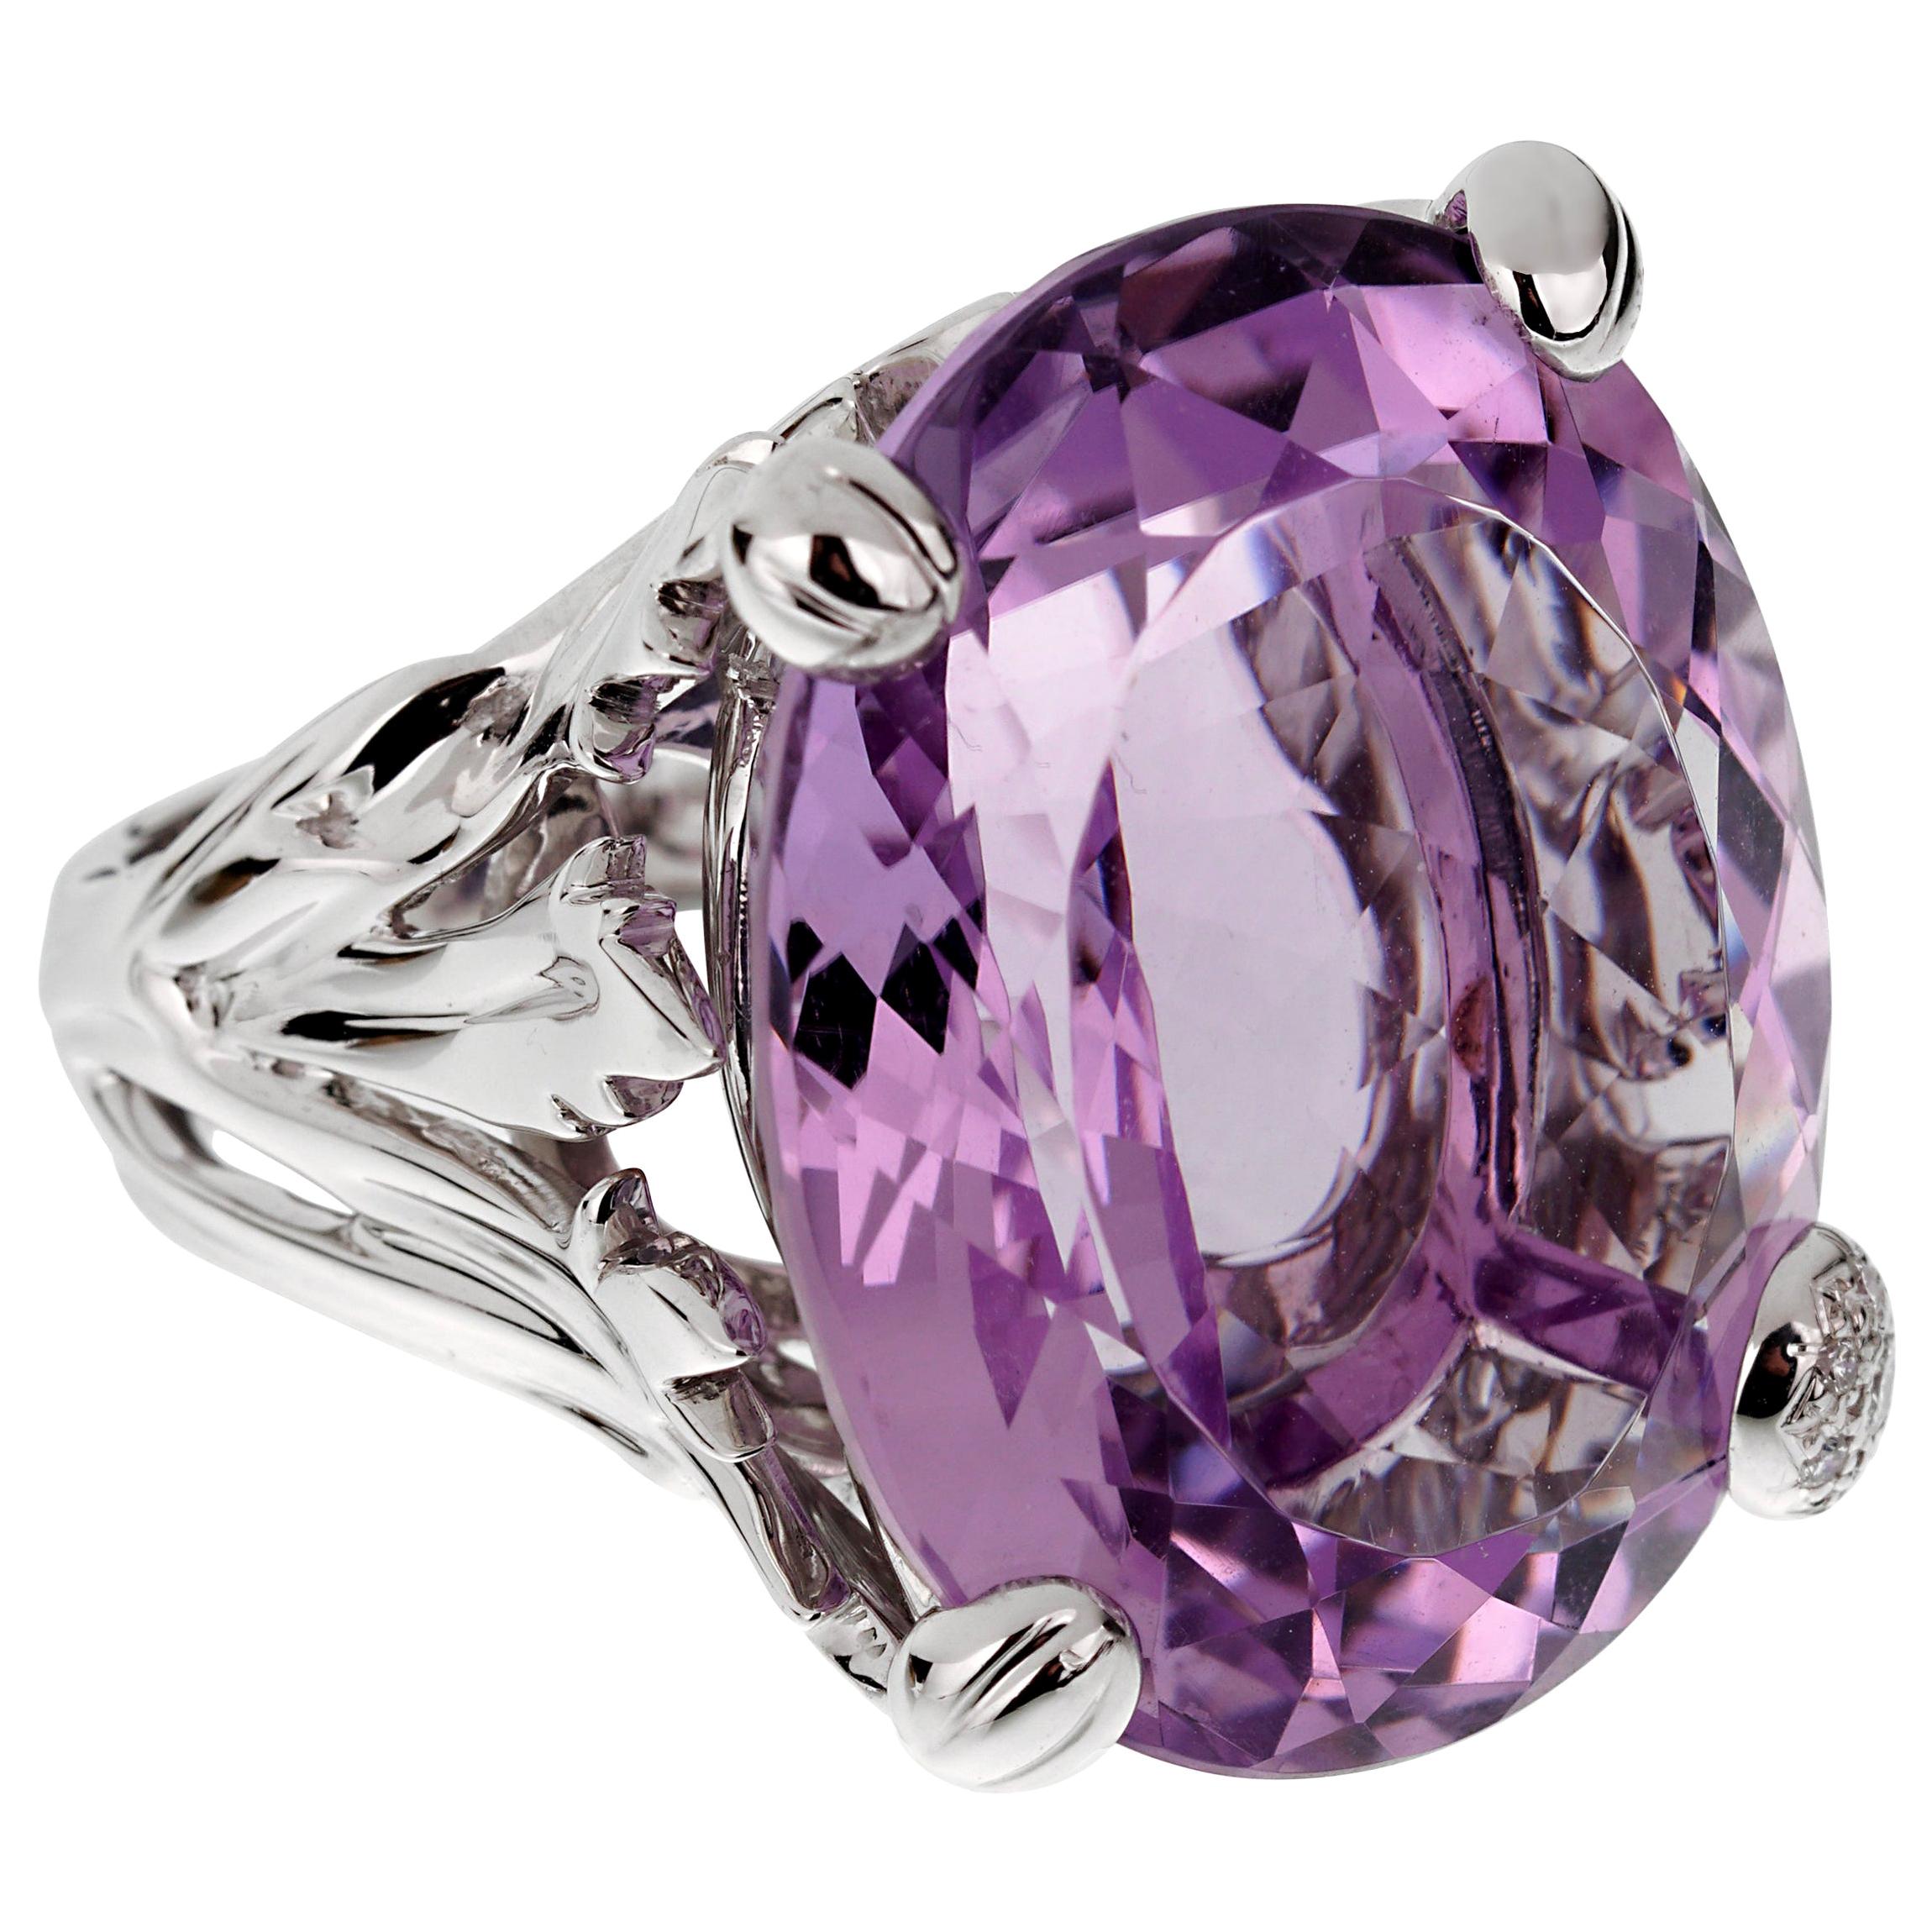 Christian Dior 44.5 Carat Amethyst Diamond Cocktail White Gold Ring For Sale